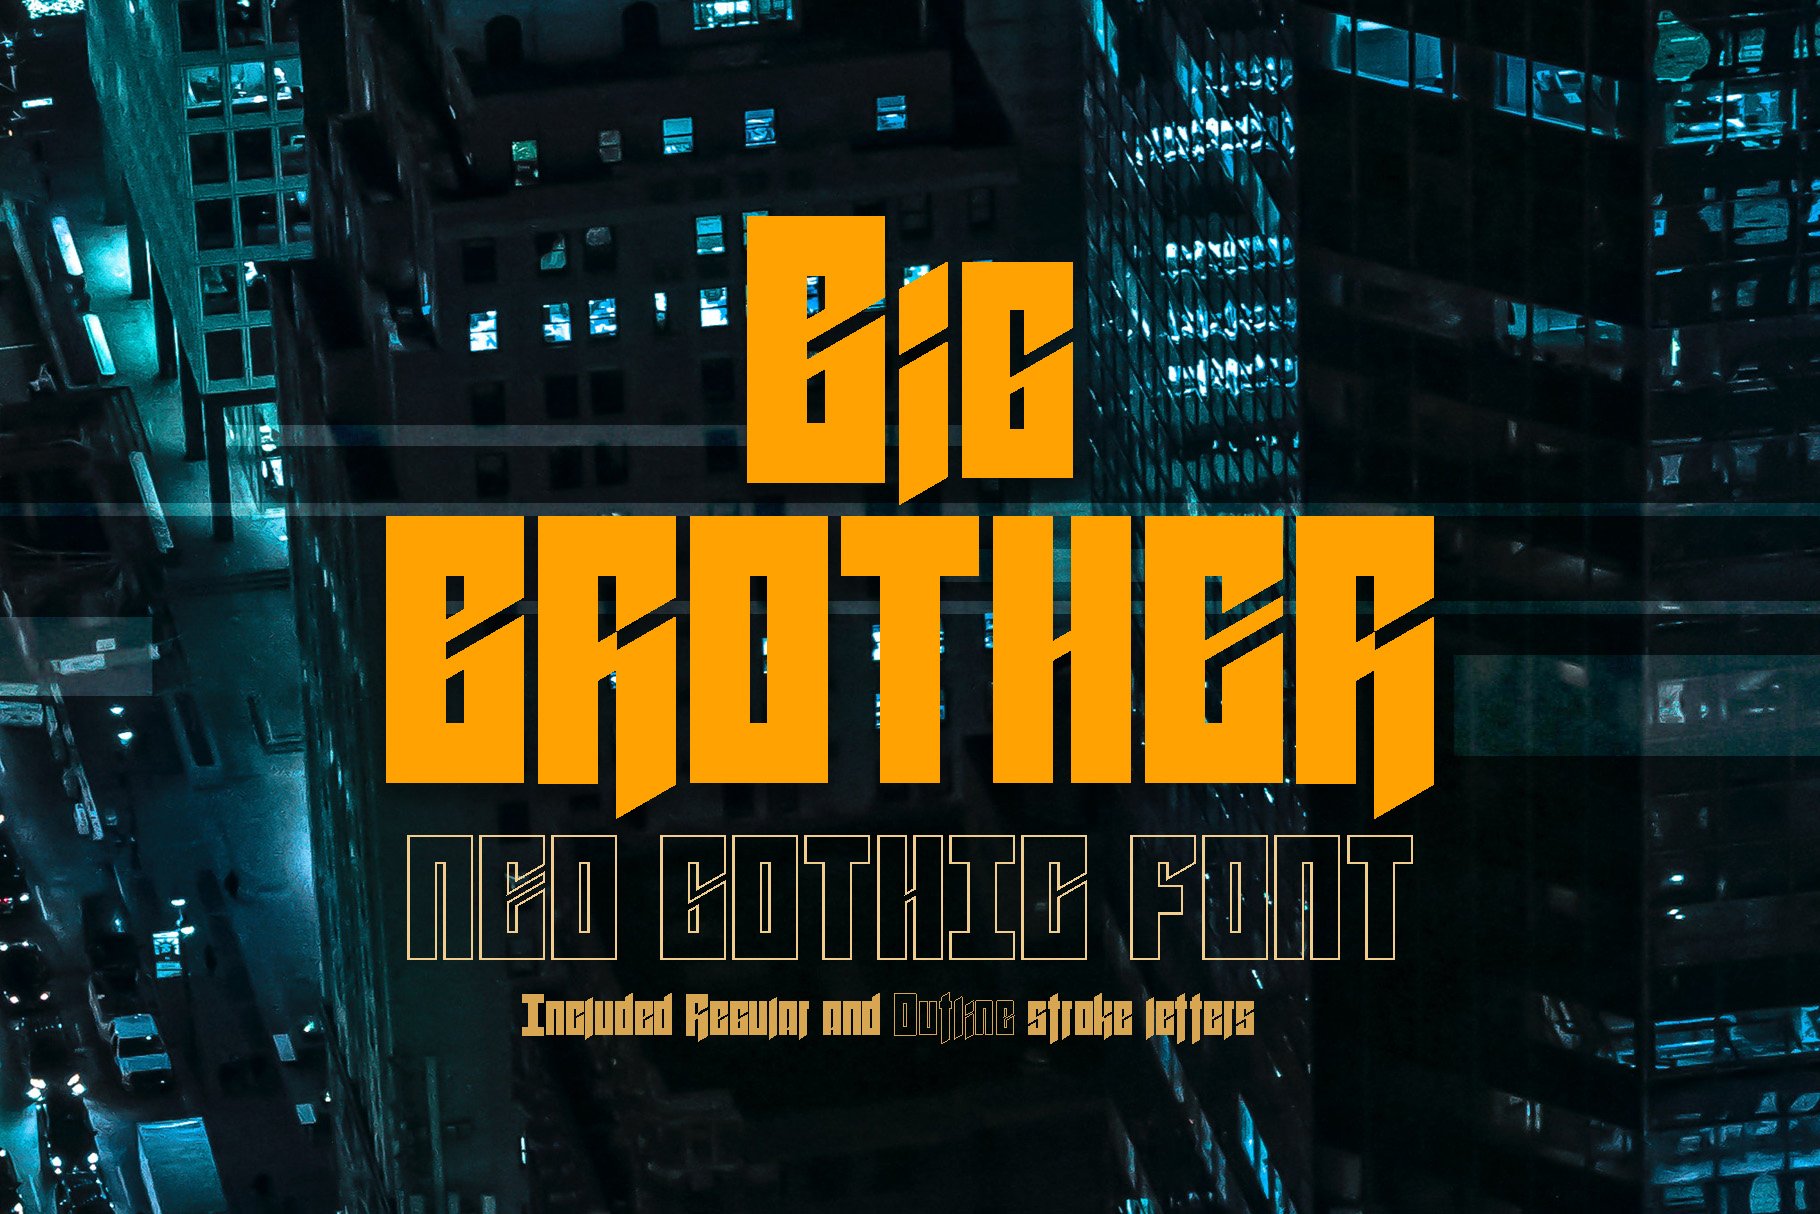 Bigbrother neo gothic font. V 0.2 cover image.